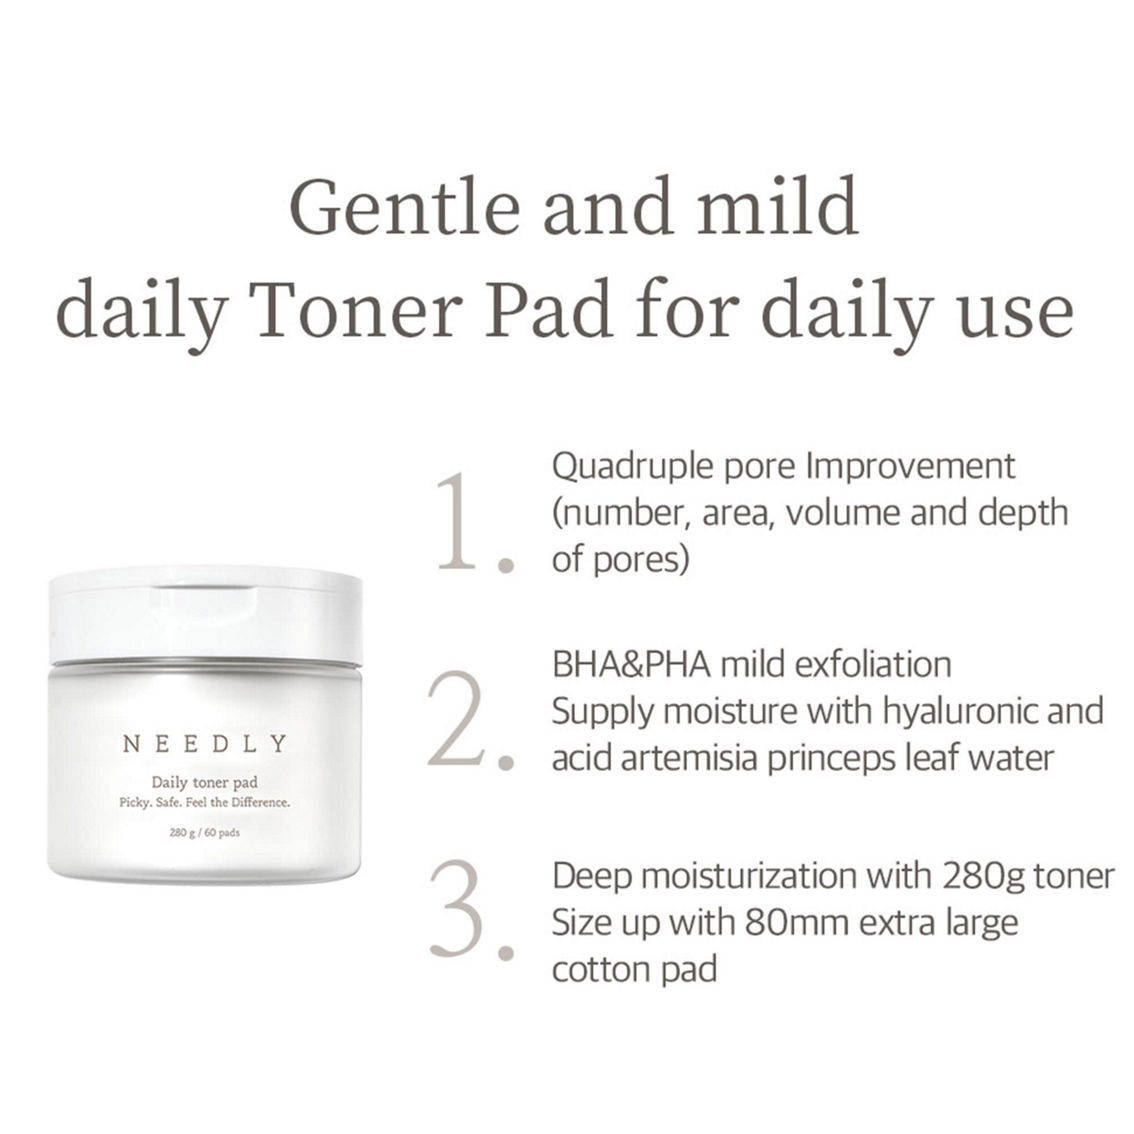 NEEDLY Daily Toner Pad (60 pads) - Image 3 of 5